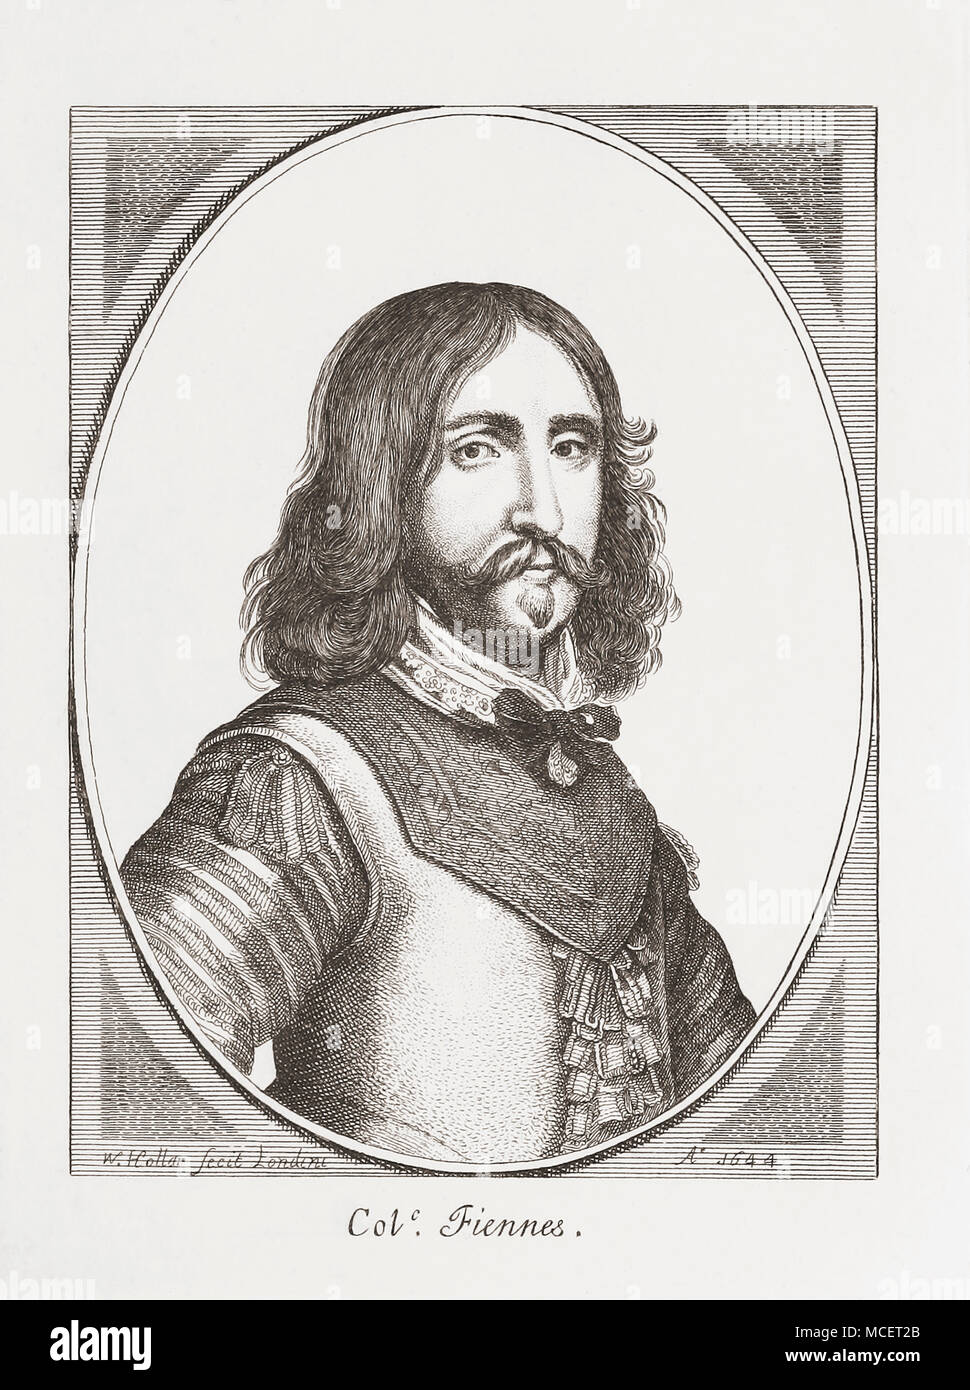 Nathaniel Fiennes, 1610-1669.  English politician. Colonel in Parliamentary Army during English Civil War. From Woodburn’s Gallery of Rare Portraits, published 1816. Stock Photo